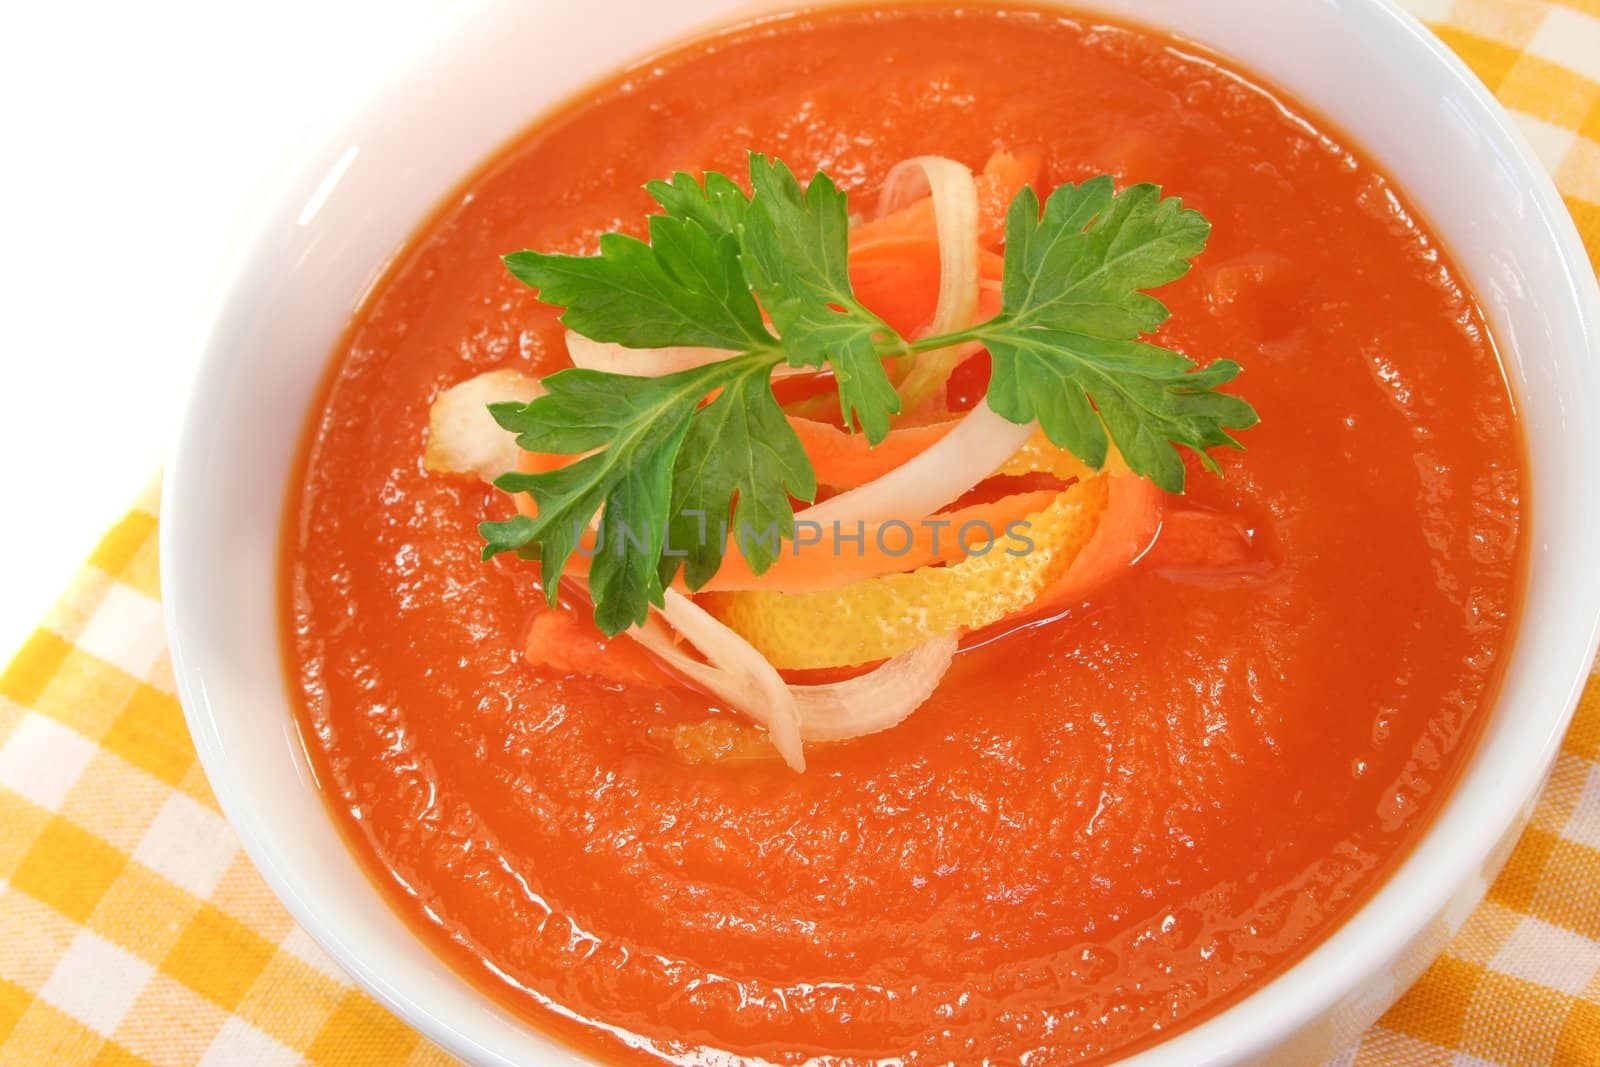 Carrot soup by discovery